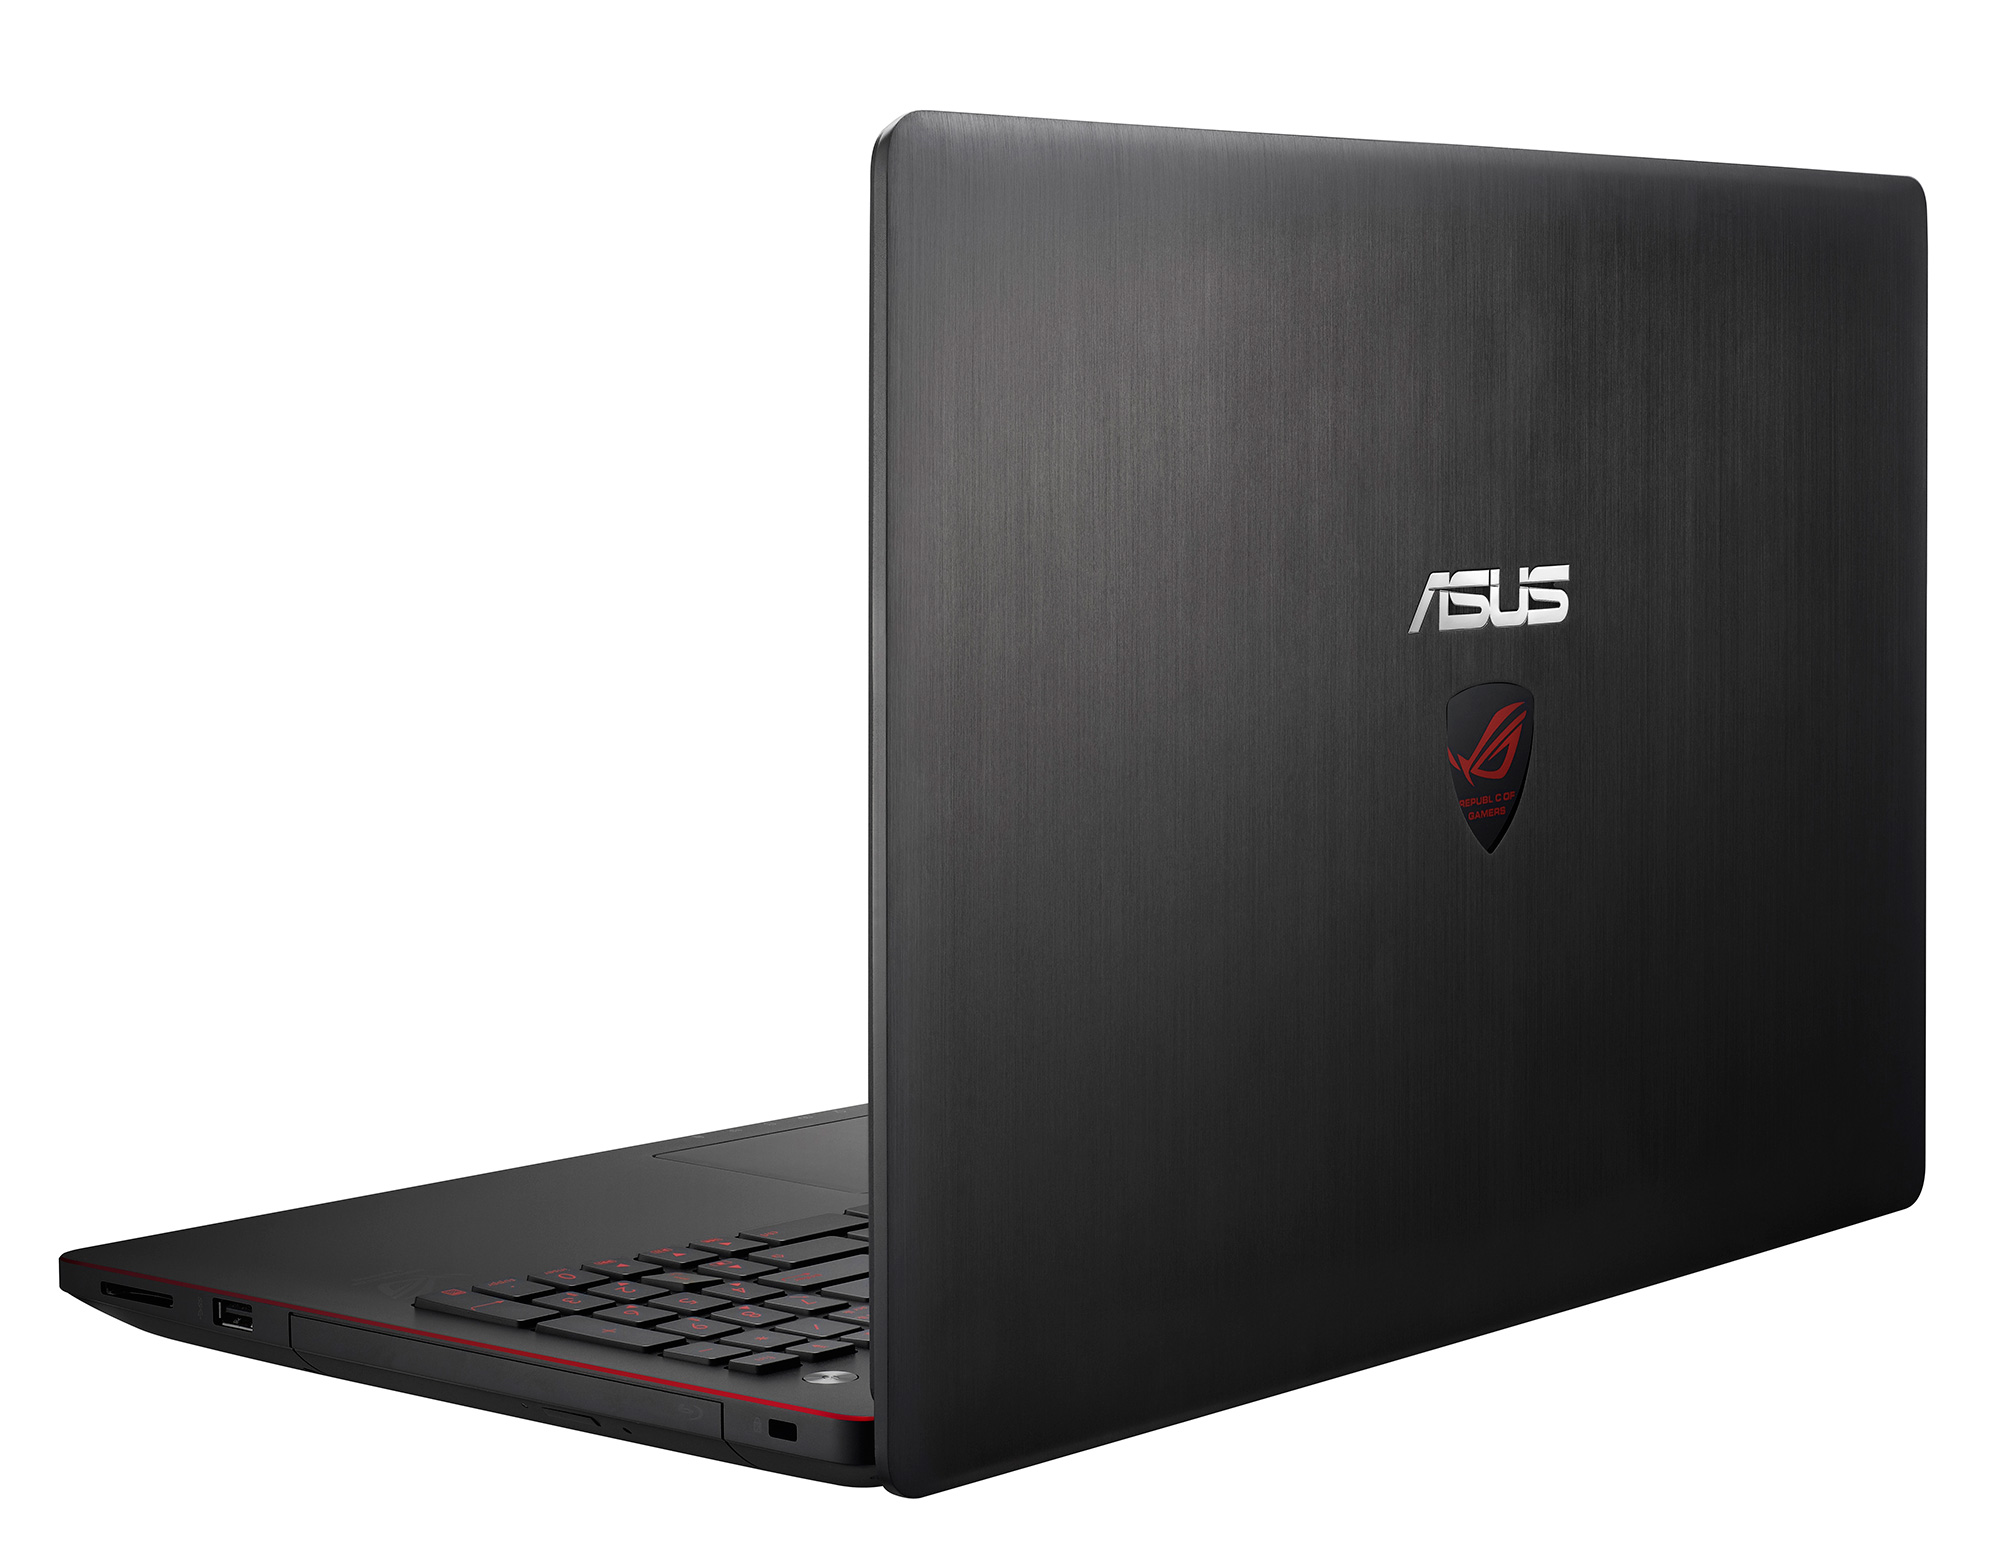 Media asset in full size related to 3dfxzone.it news item entitled as follows: ASUS annuncia il gaming notebook Republic of Gamers G550JK | Image Name: news21247_ASUS-G550JK-gaming-notebook_3.jpg